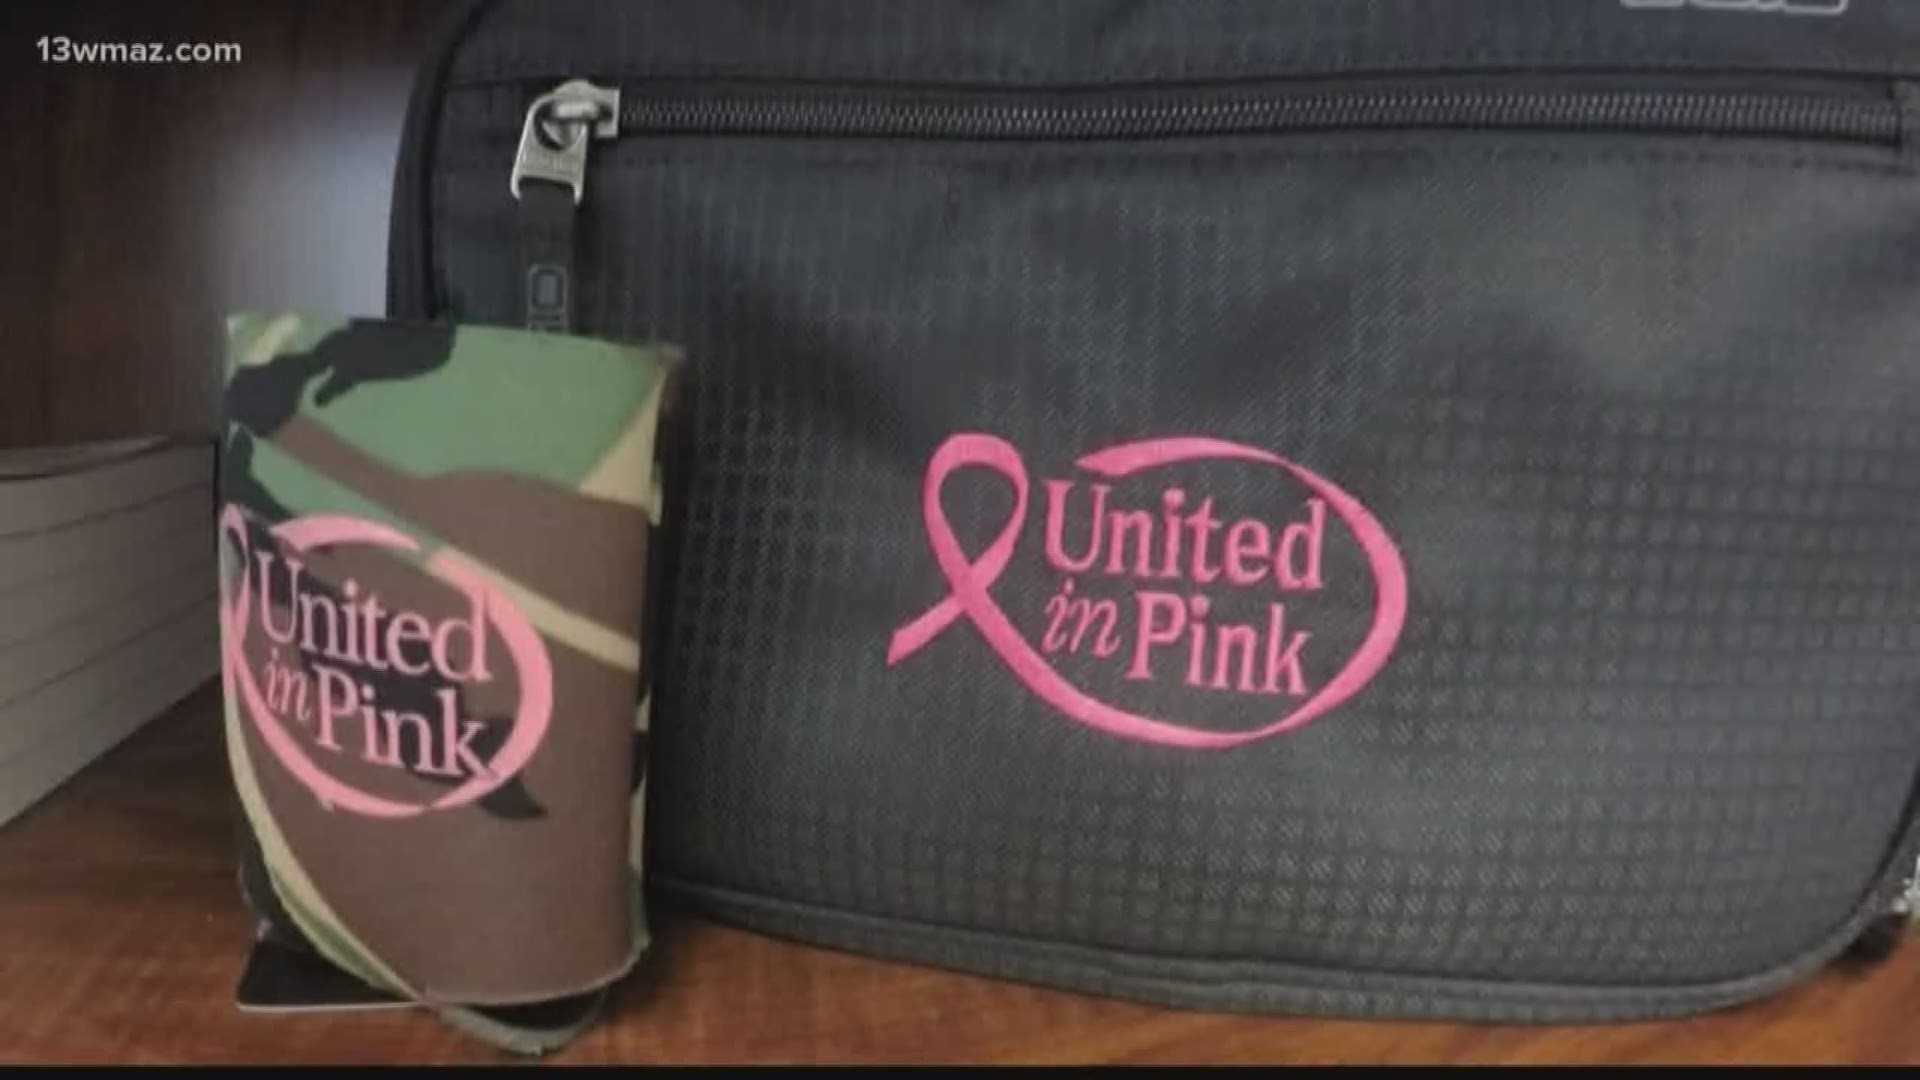 United in Pink hopes to lessen the financial burden for breast cancer patients through the Pink Bridge Program.